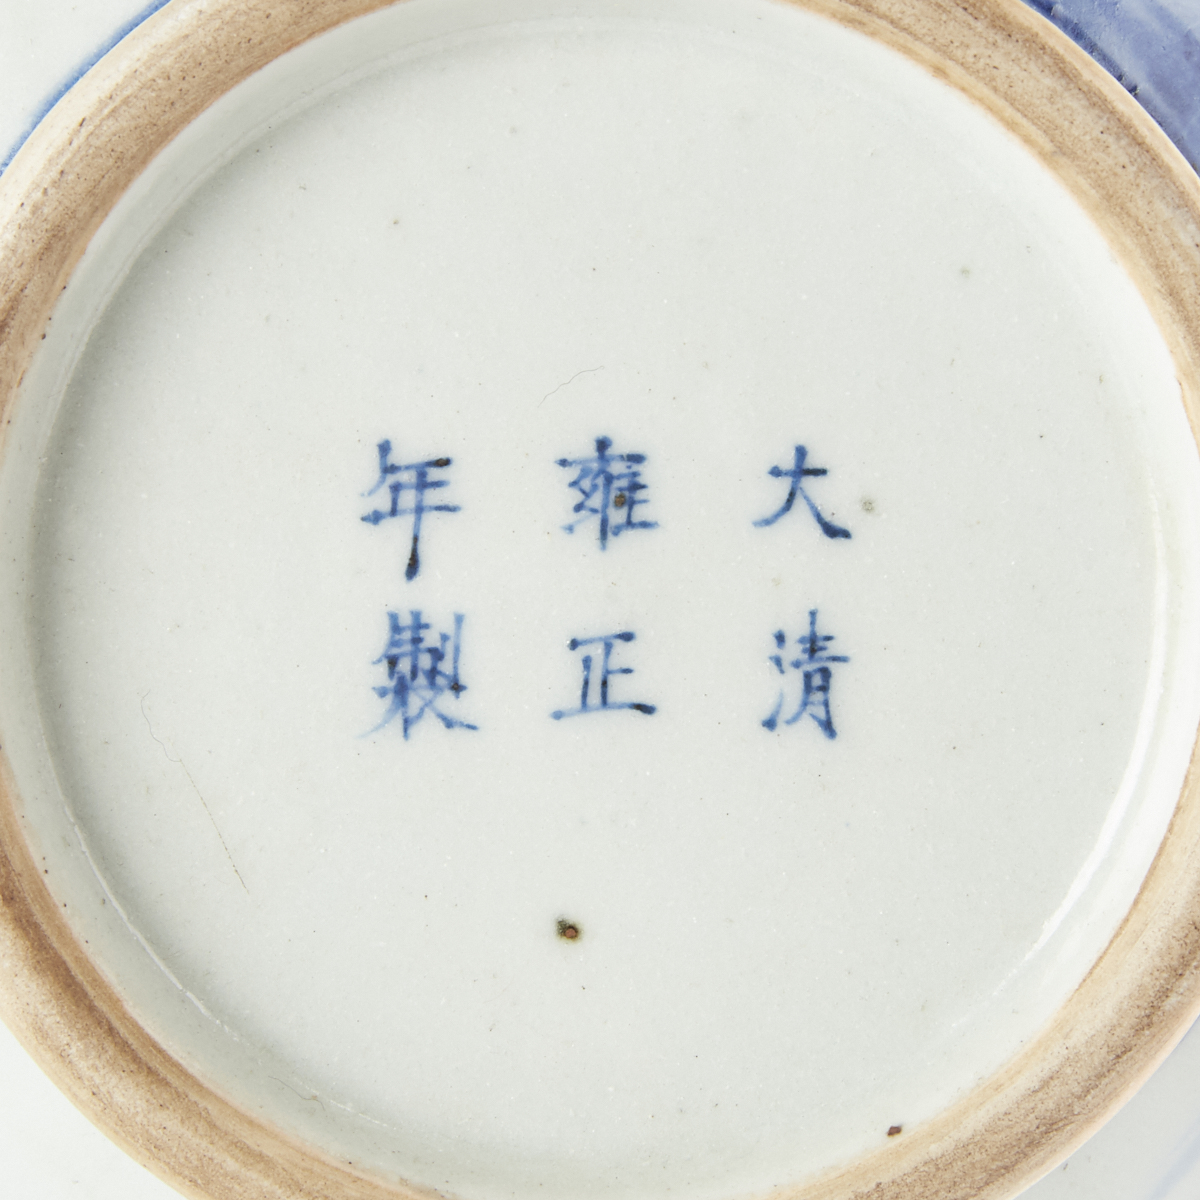 Grp: 3 20th c. Chinese Republic Porcelain Vases - Marked - Image 6 of 8